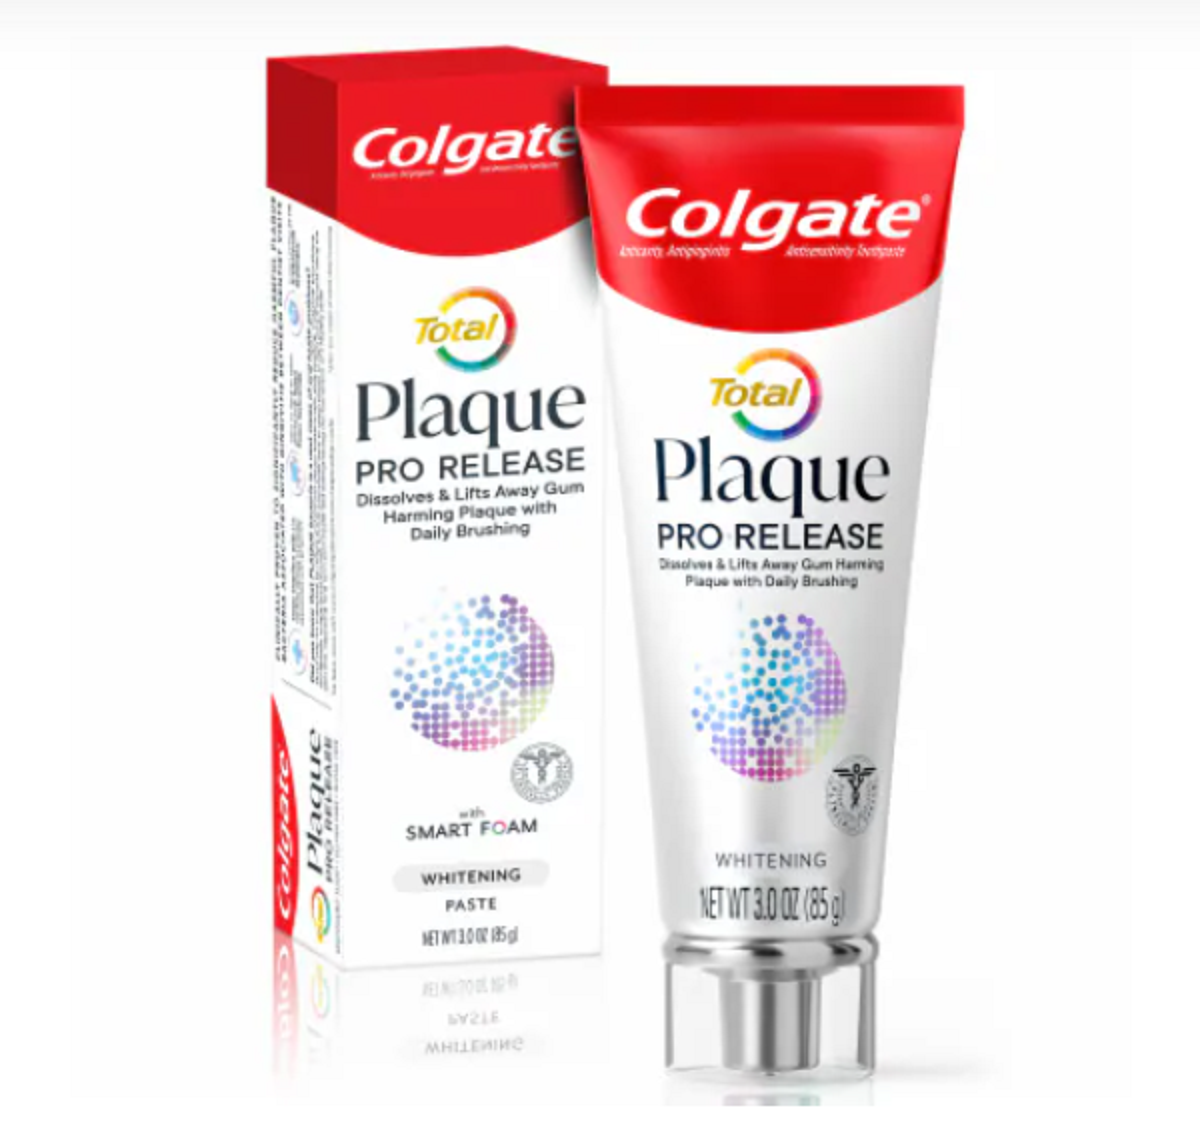 Colgate Online Coupons: Colgate Total Plaque Pro-Release Toothpaste, Just $2.99 at Kroger